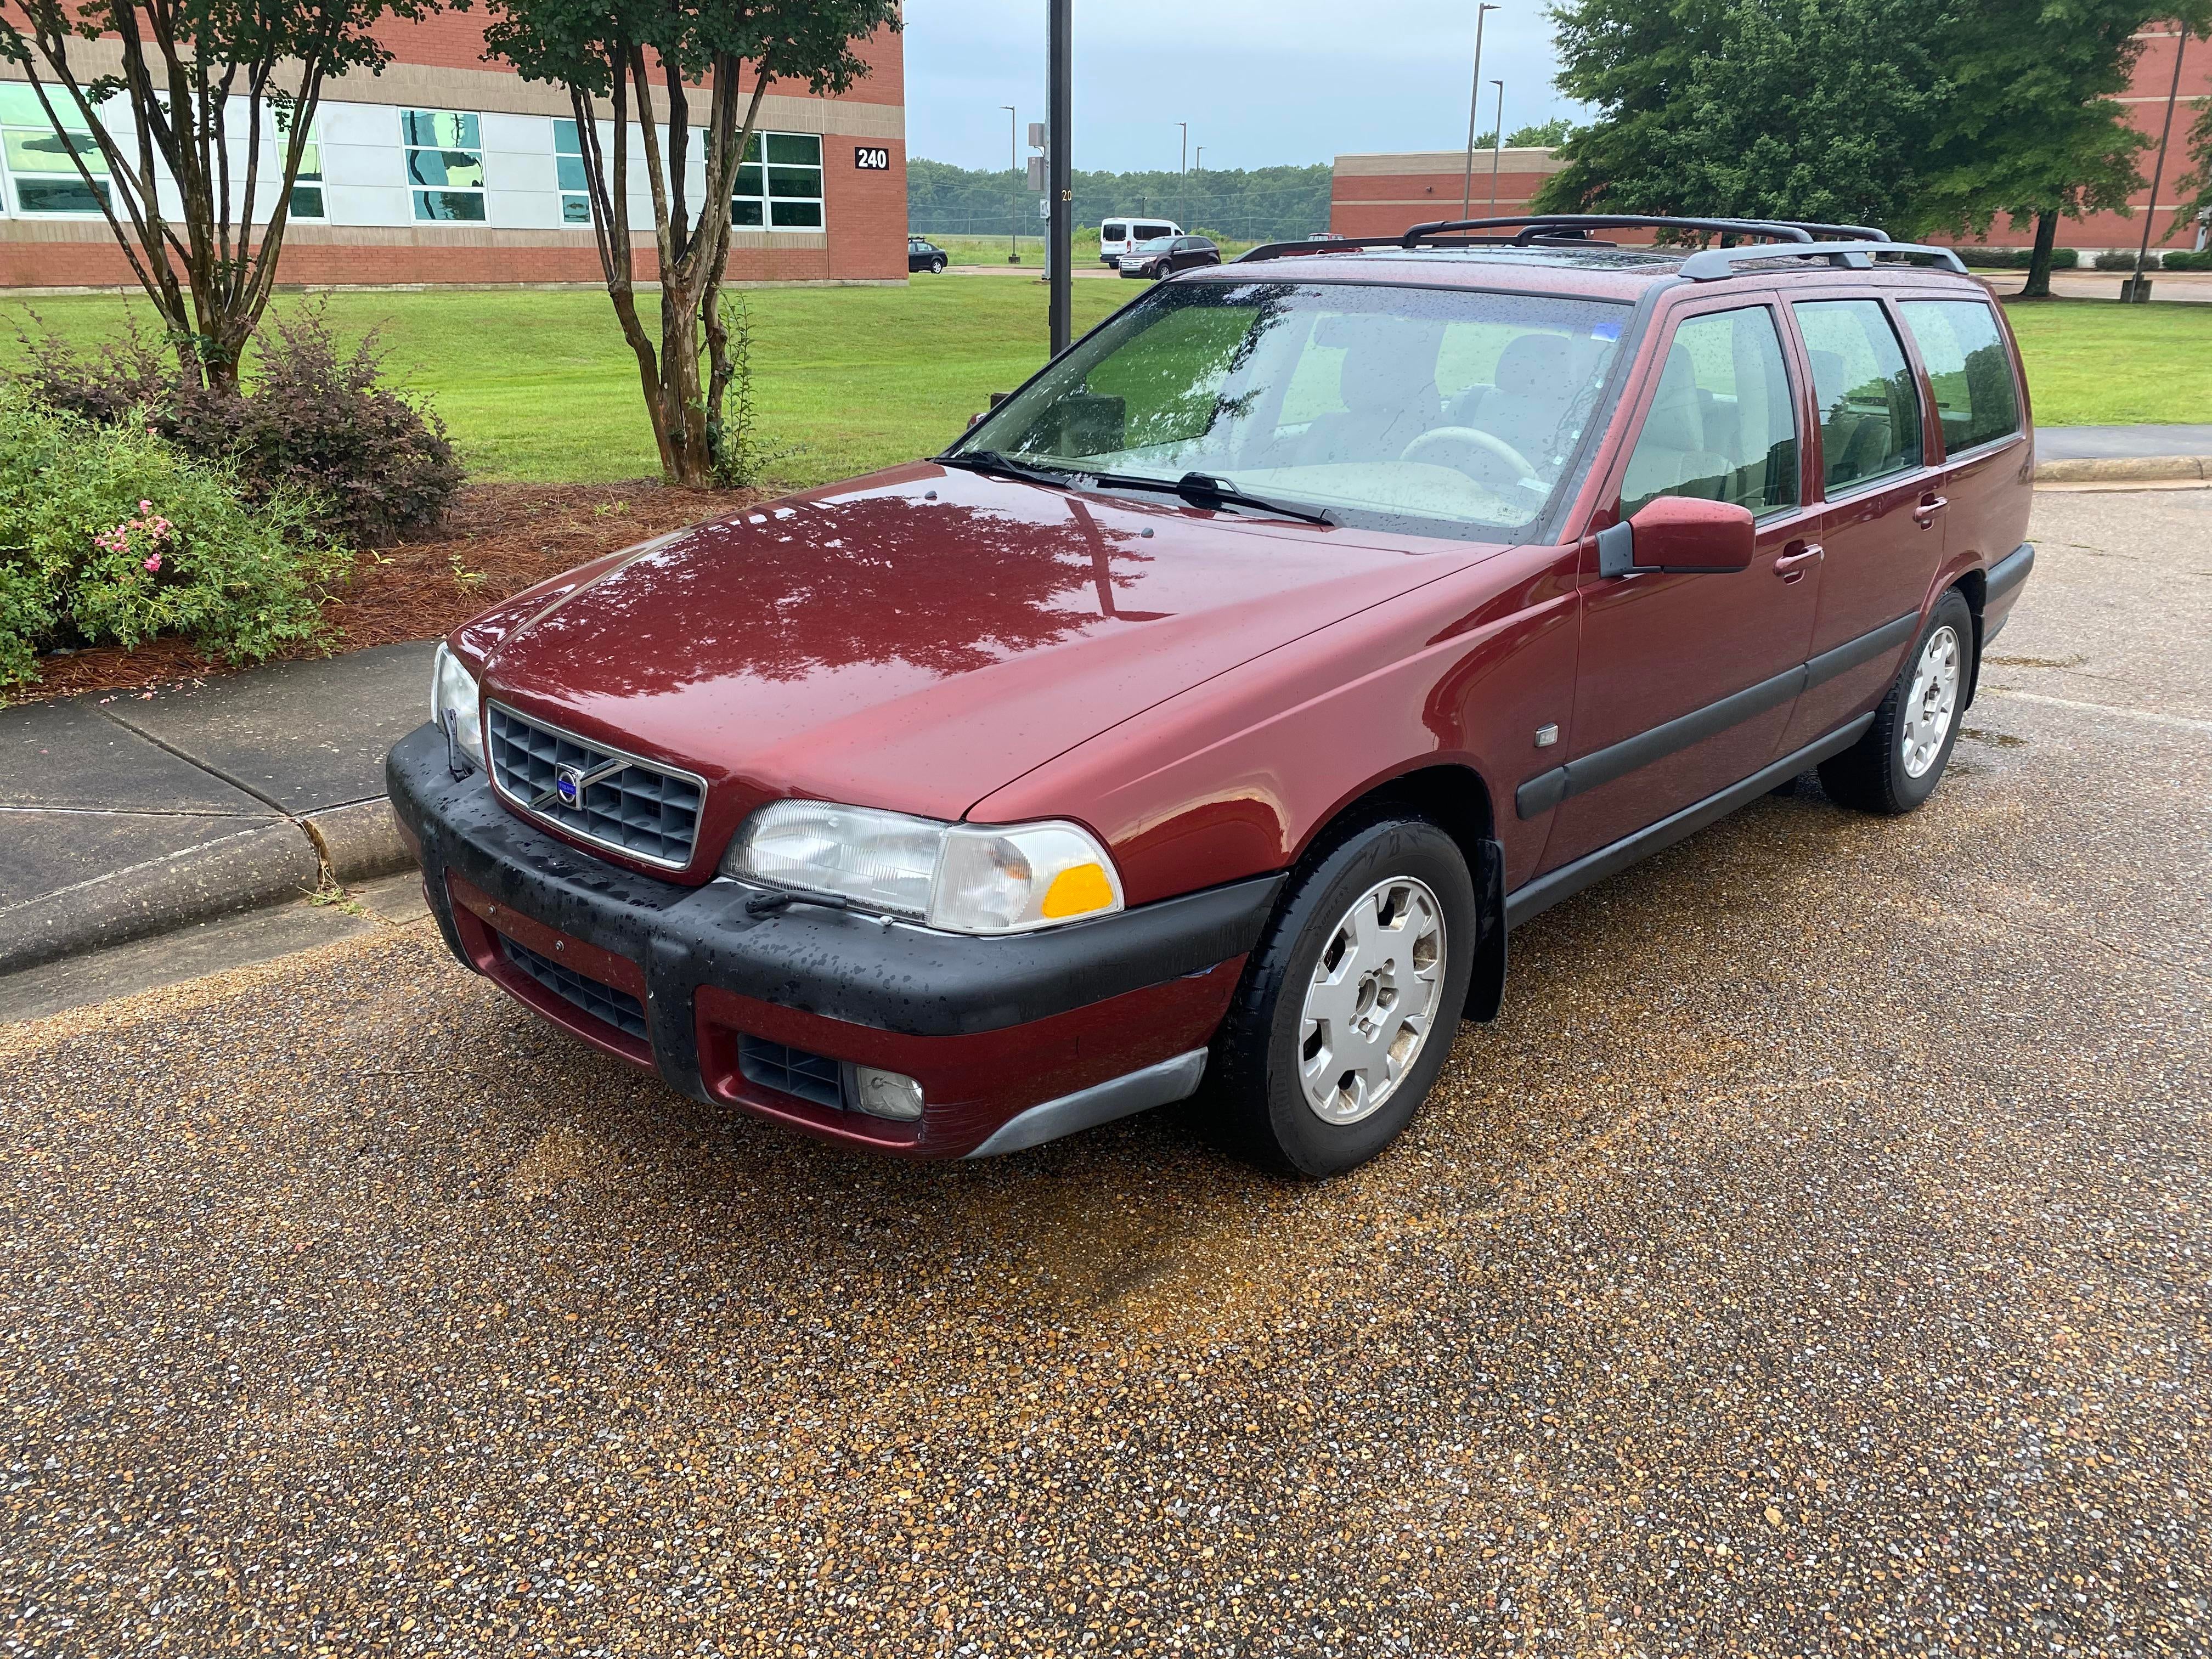 New (to me) 2000 v70 : r/Volvo